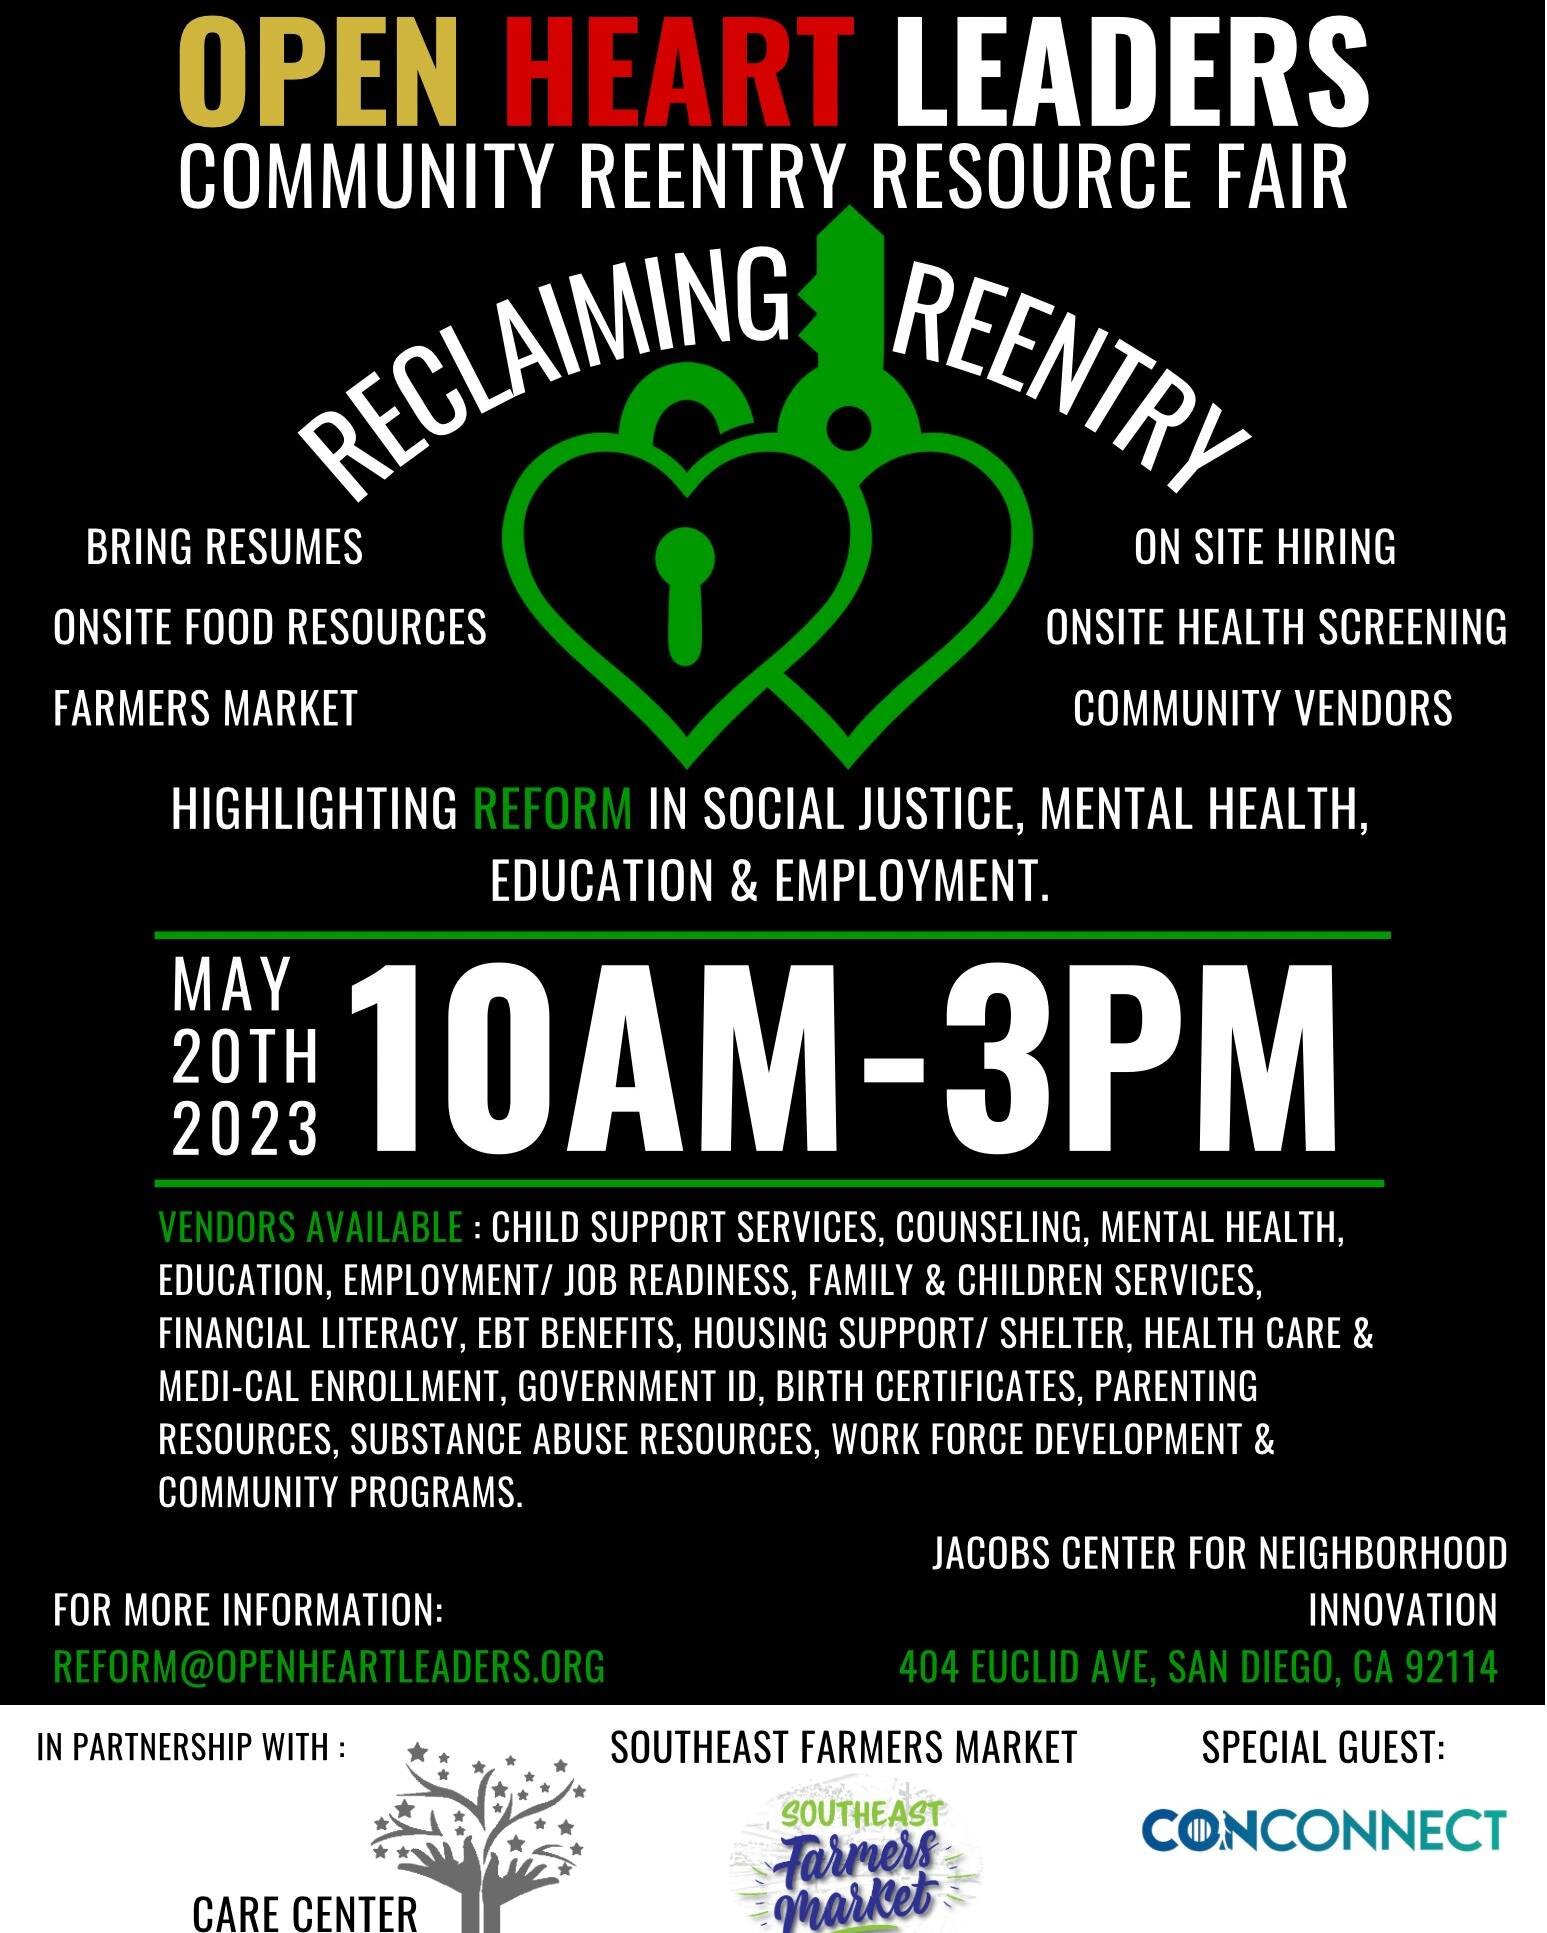 Open Heart Leaders, in partnership with Care Center and Southeast Farmers Market with Special Guest Andre Peart presenting ConConnect, is proud to host the Community Reentry Resource Fair on May 20th from 10am-3pm at the Jacobs Center for Neighborhoo